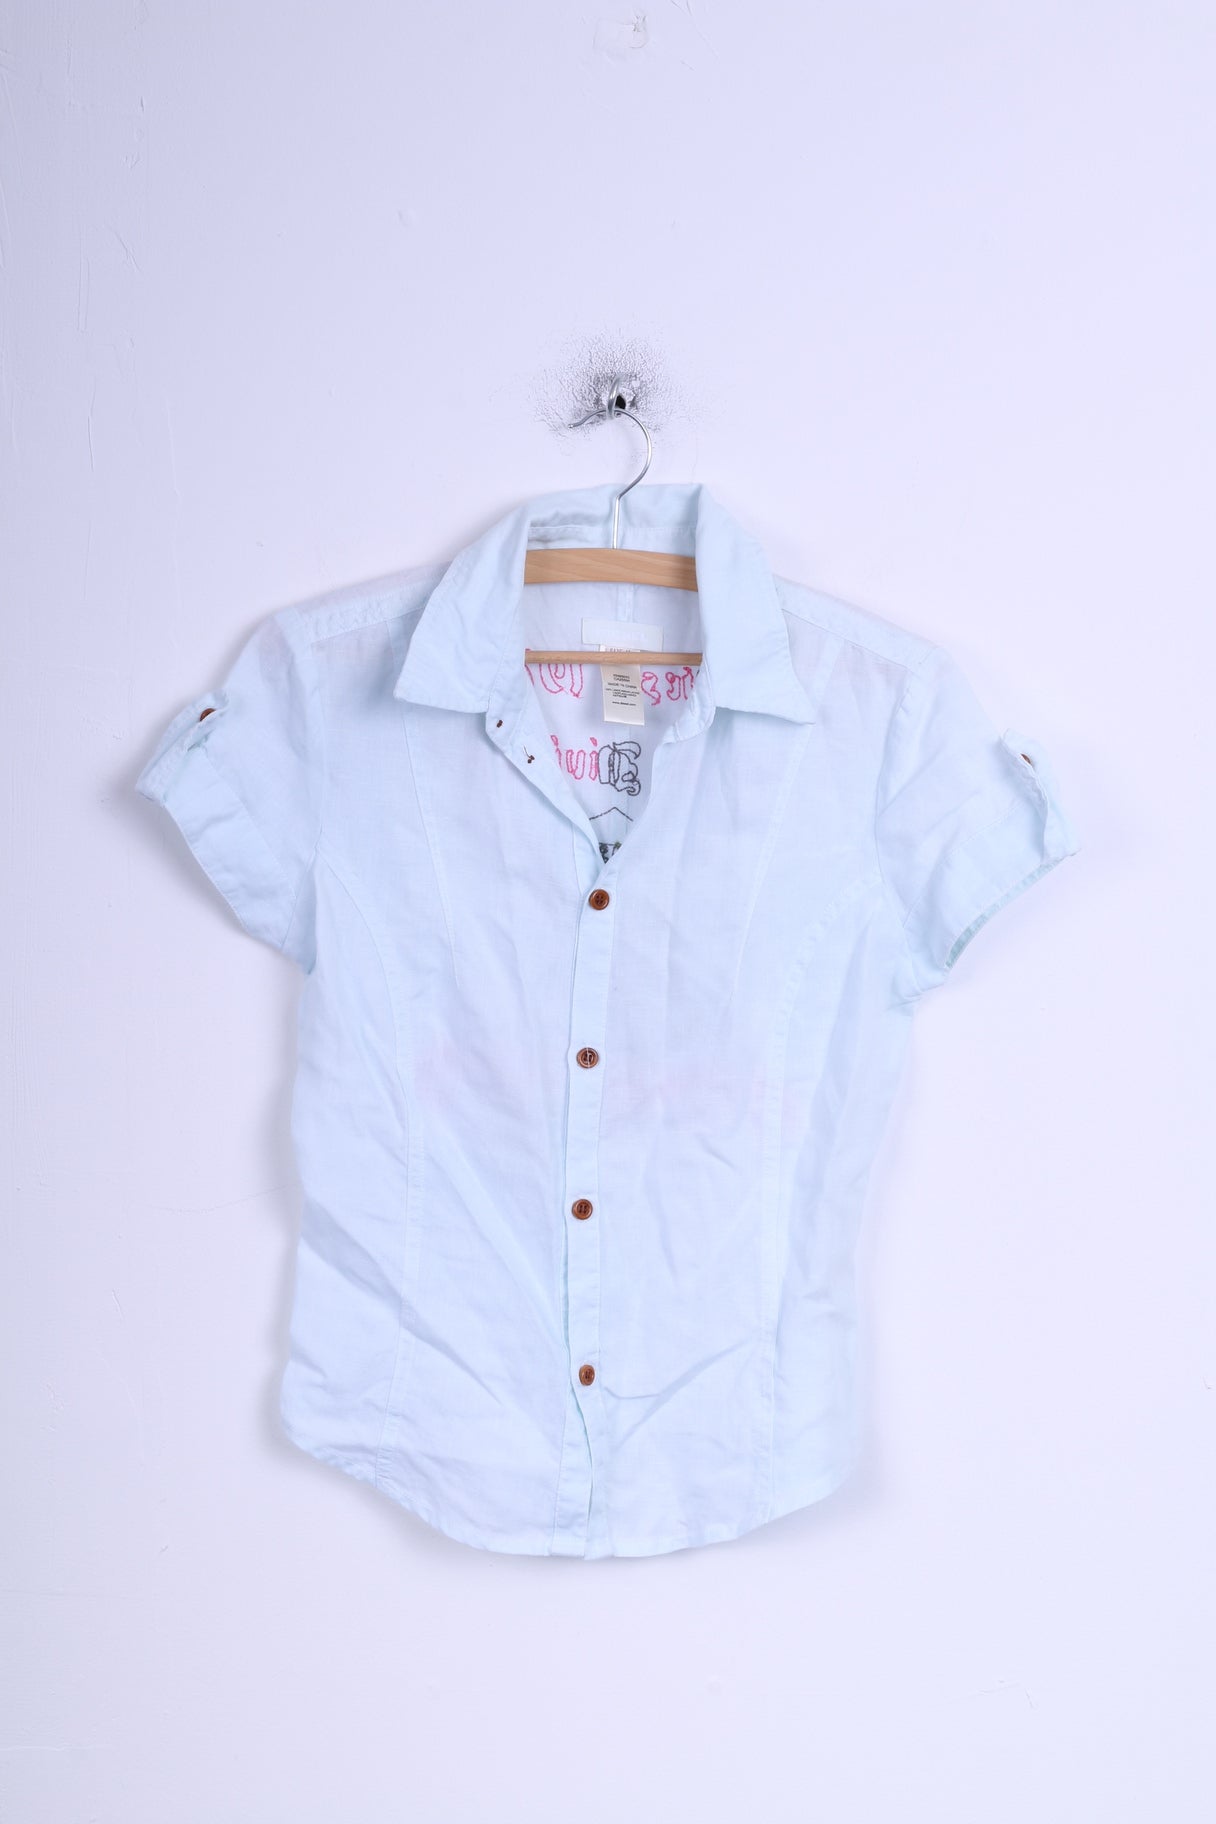 Diesel Womens M (XS) Casual Shirt Mint Linen Embroidered Back